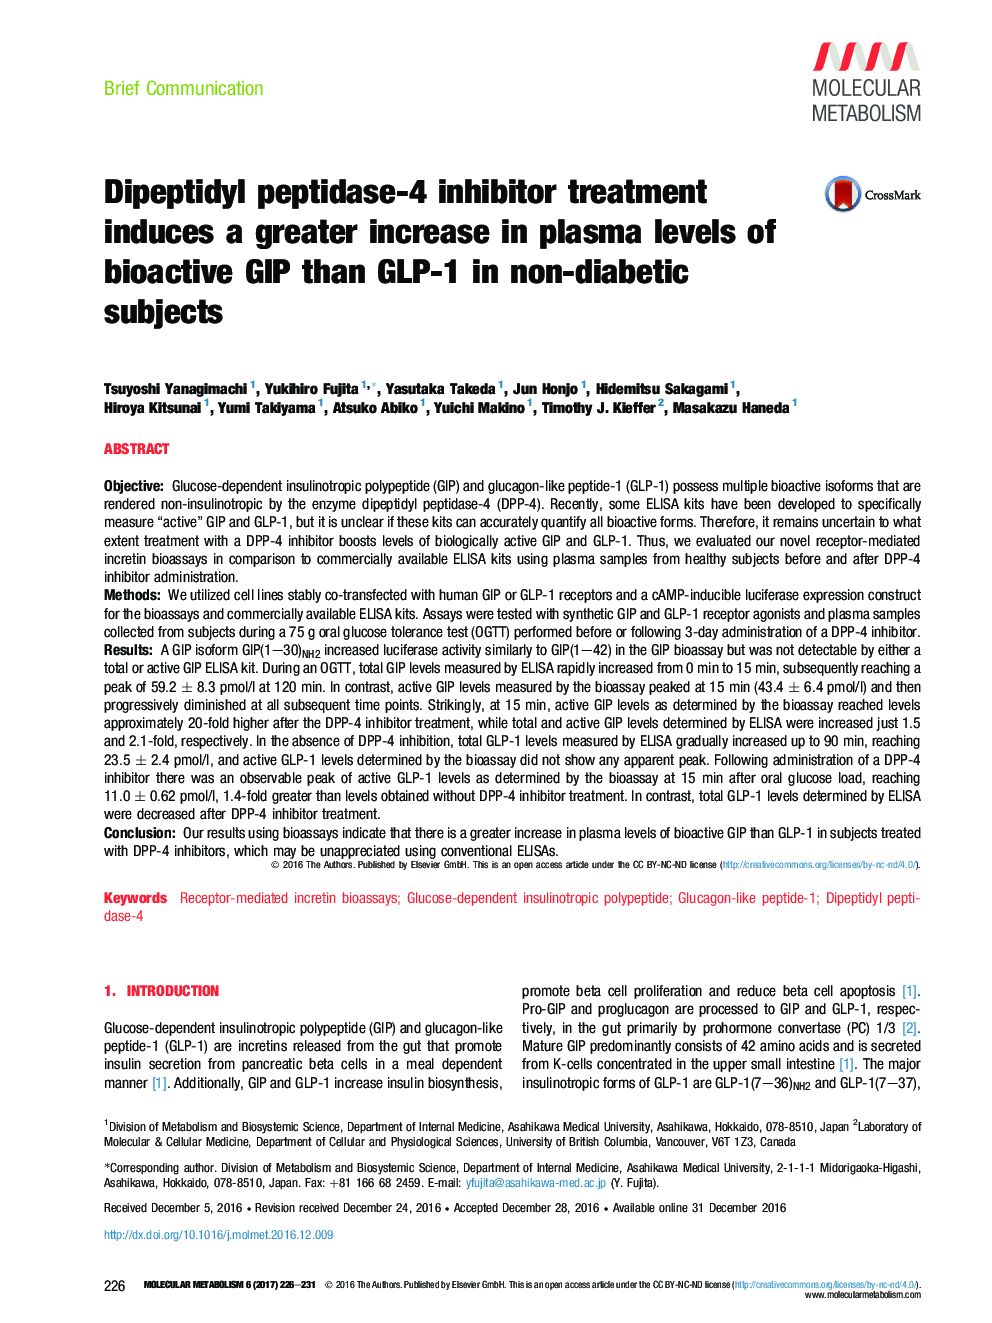 Brief CommunicationDipeptidyl peptidase-4 inhibitor treatment induces a greater increase in plasma levels of bioactive GIP than GLP-1 in non-diabetic subjects